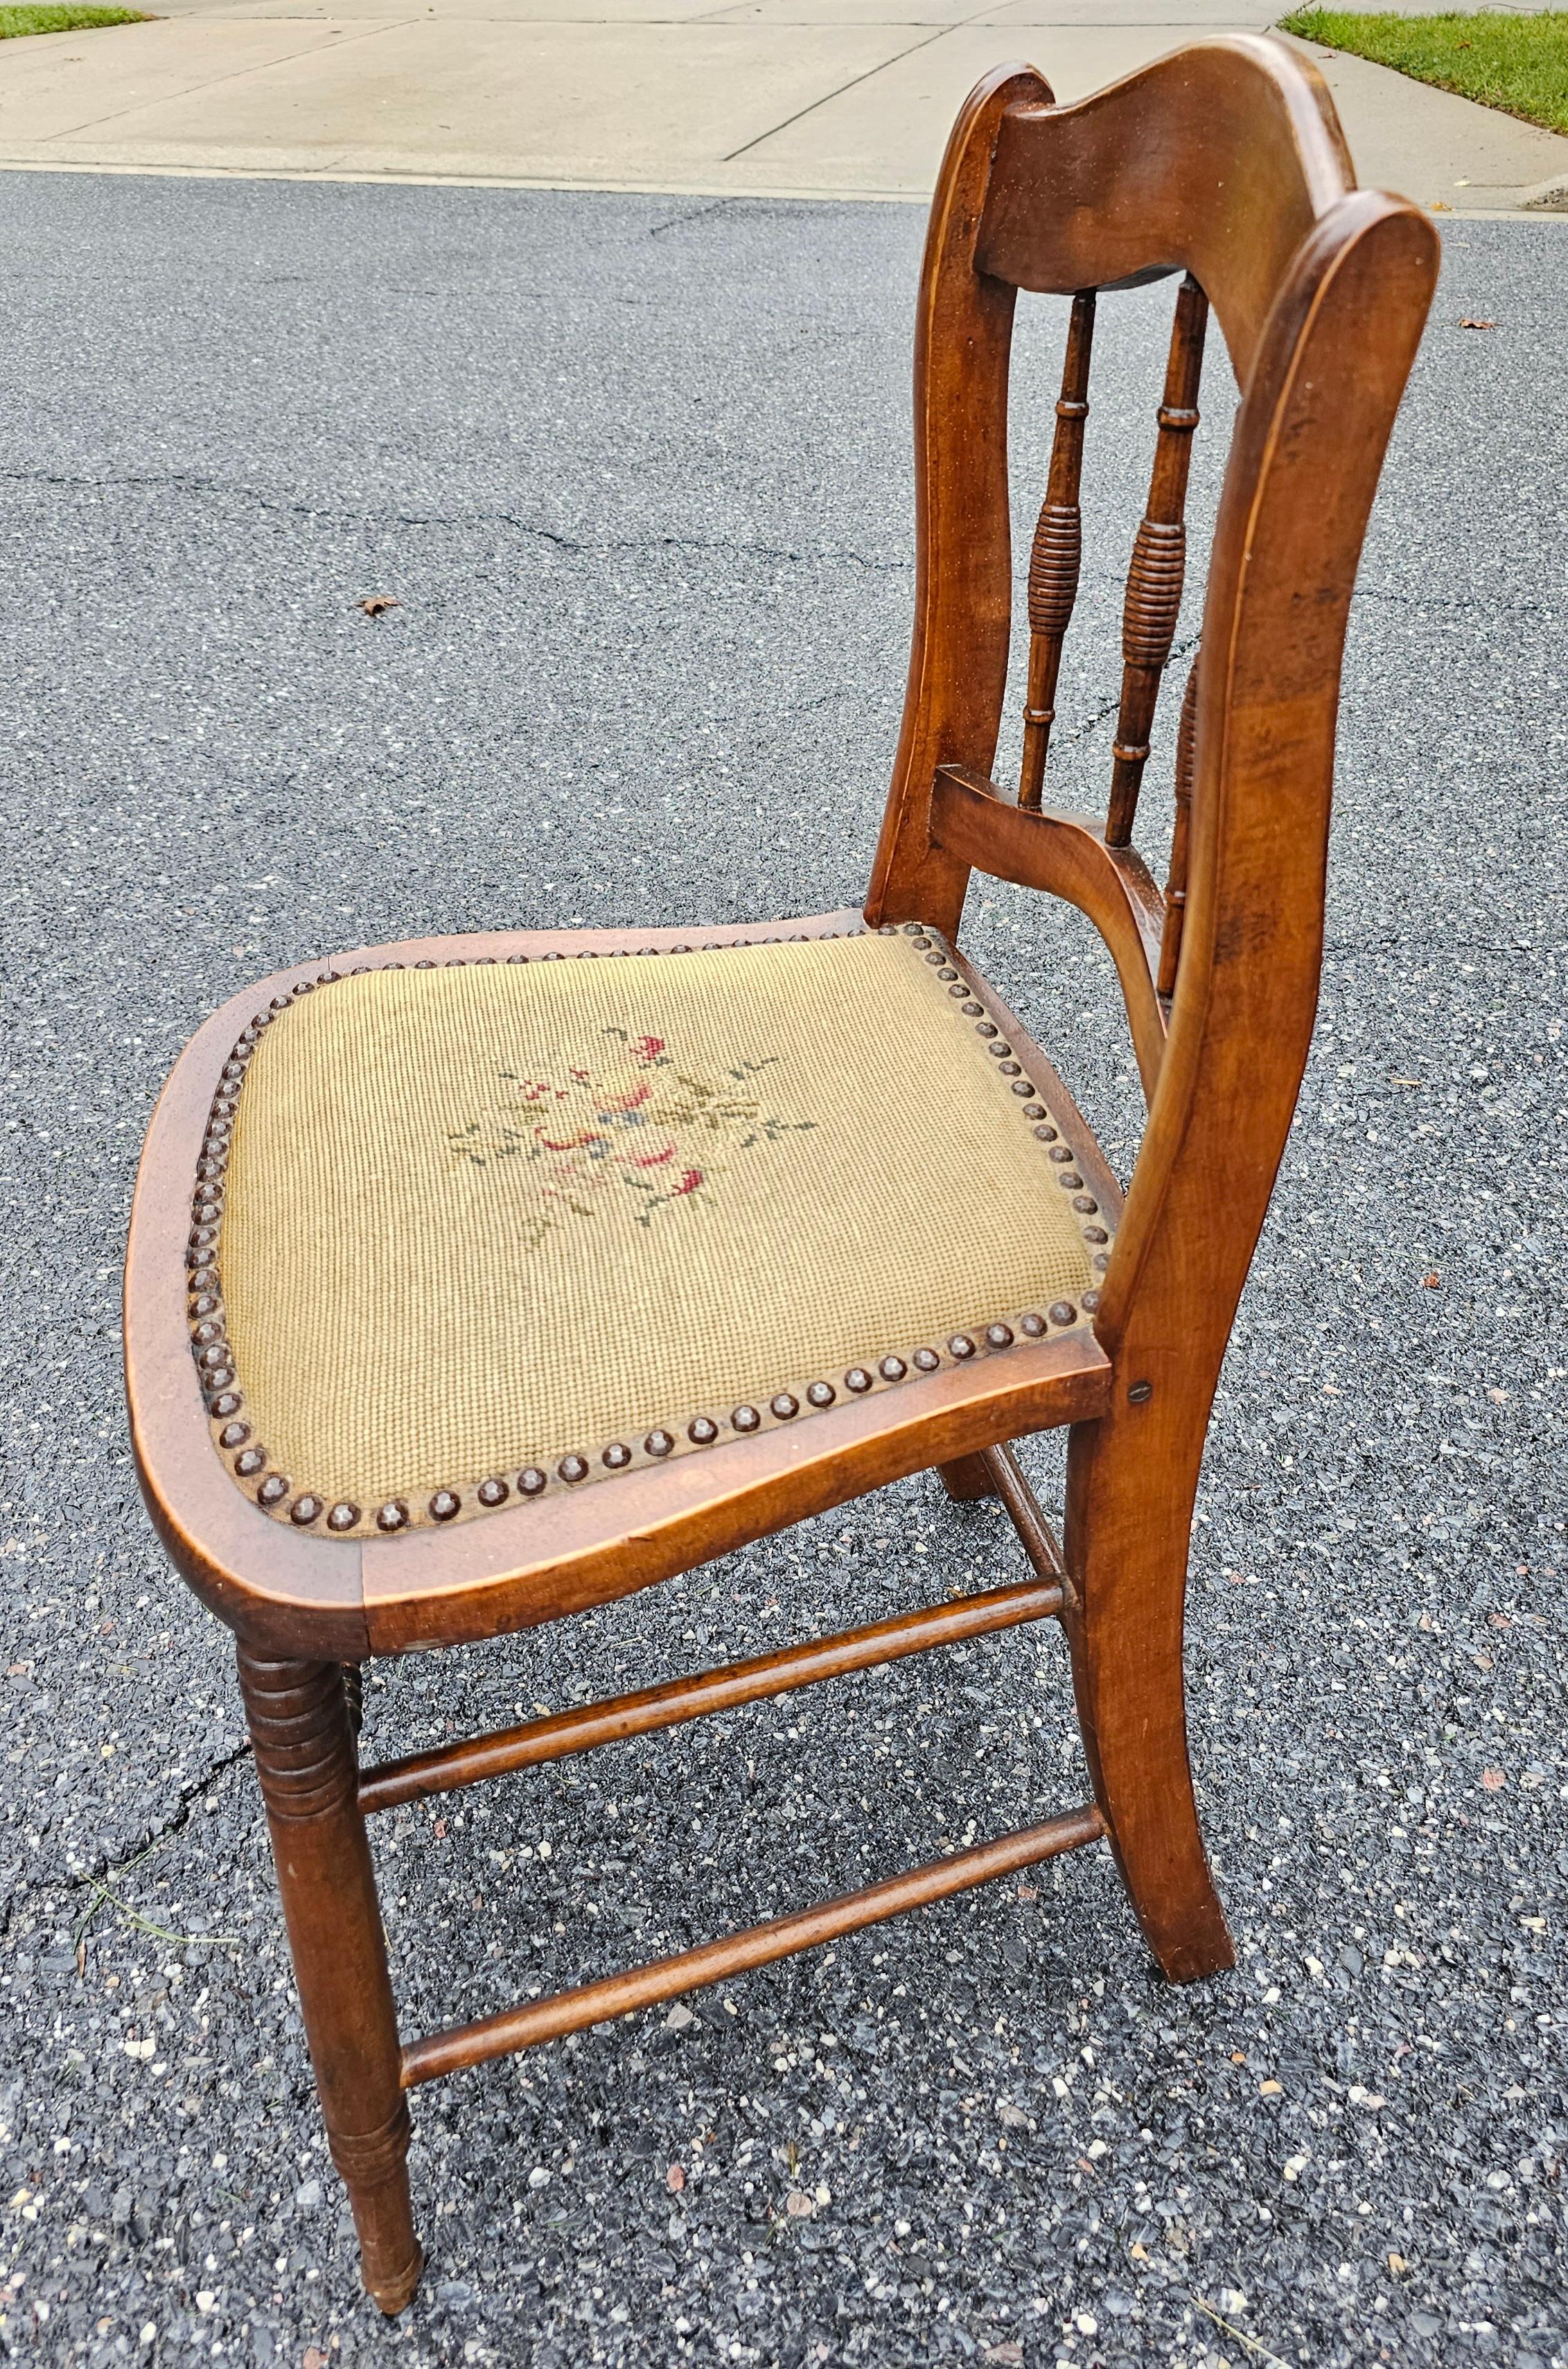 19th Century American Walnut and Needlepoint Upholstered Seat Side Chairs, Pair In Good Condition For Sale In Germantown, MD